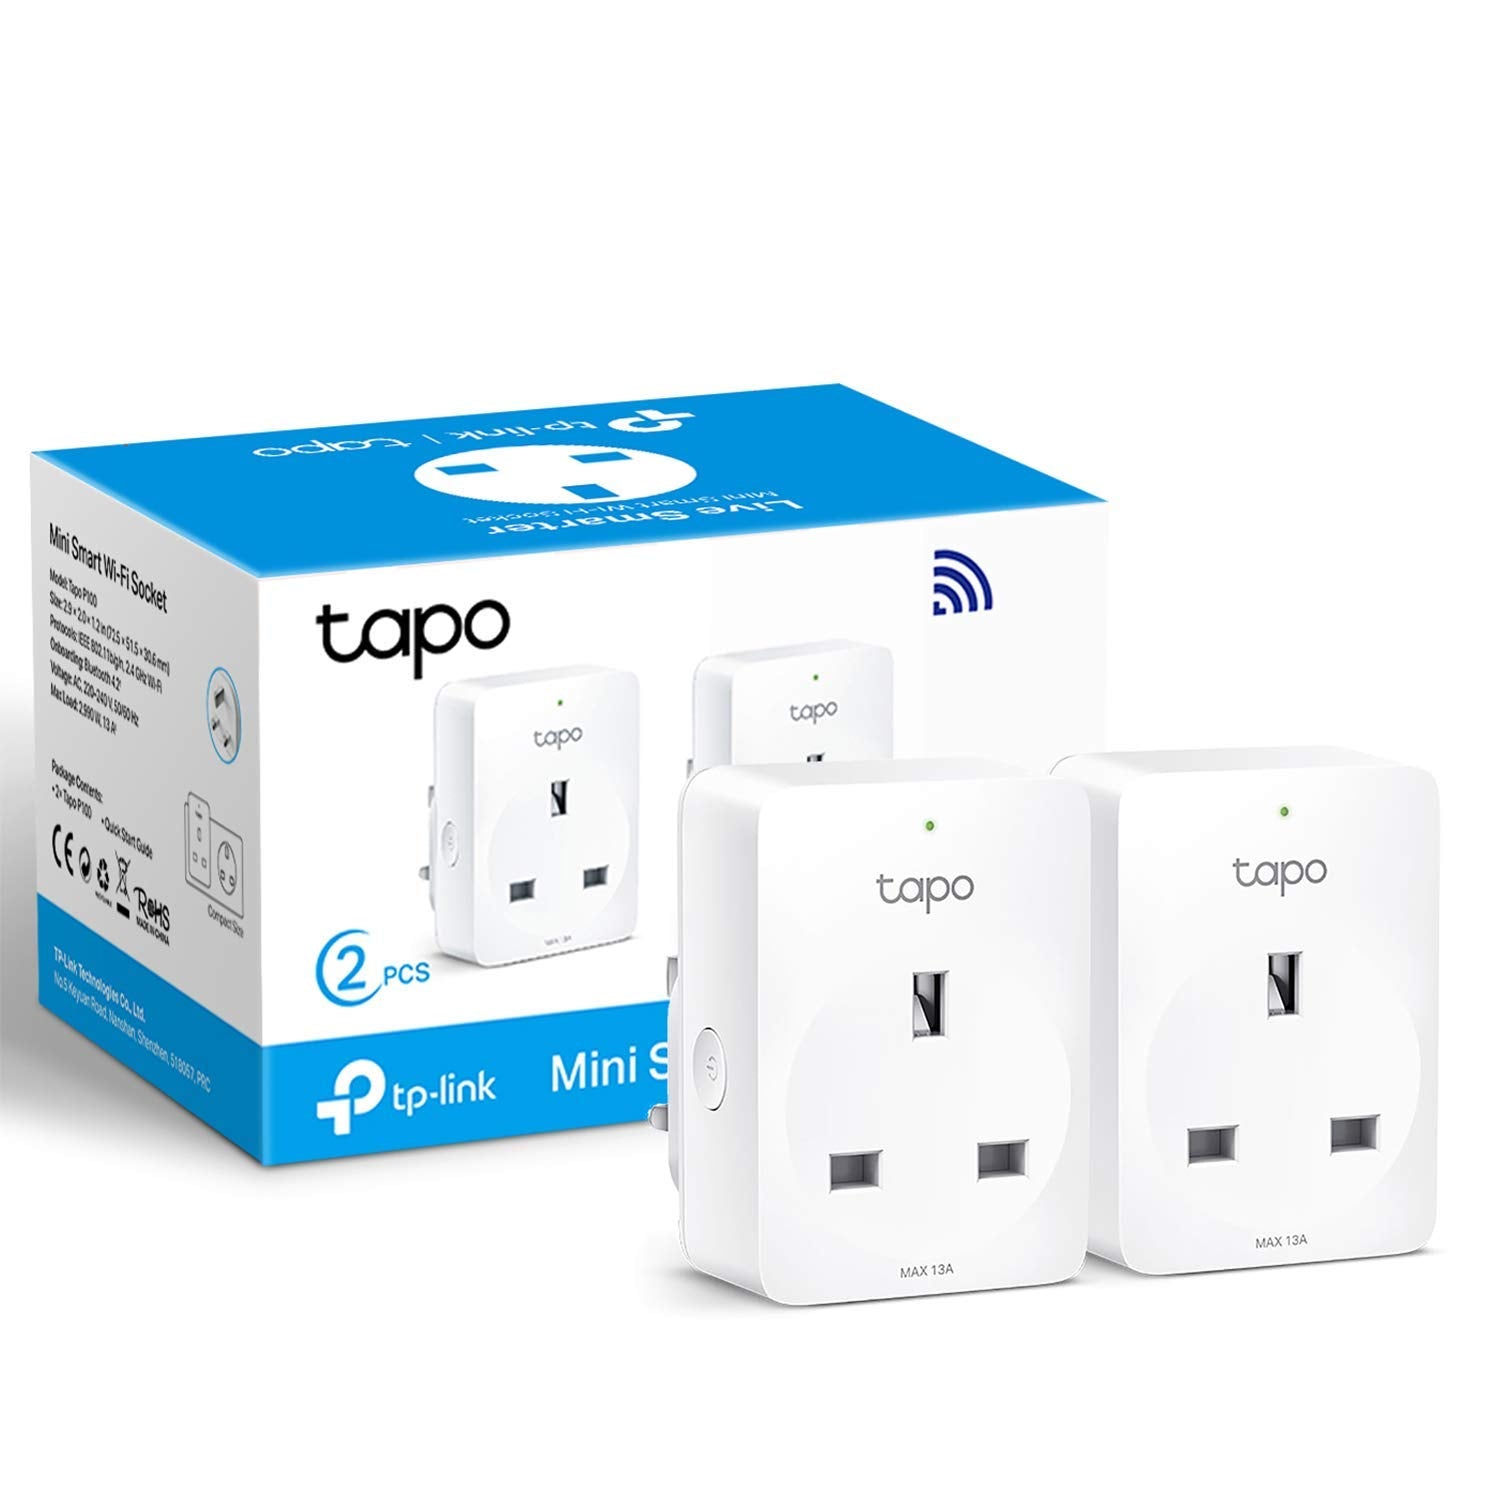 TP-Link Tapo Smart Plug Wi-Fi Outlet, Works with Amazon Alexa (Echo and Echo Dot), Google Home, Wireless Smart Socket, Device Sharing, Without Energy Monitoring, No Hub Required - Tapo P100 (2-Pack)